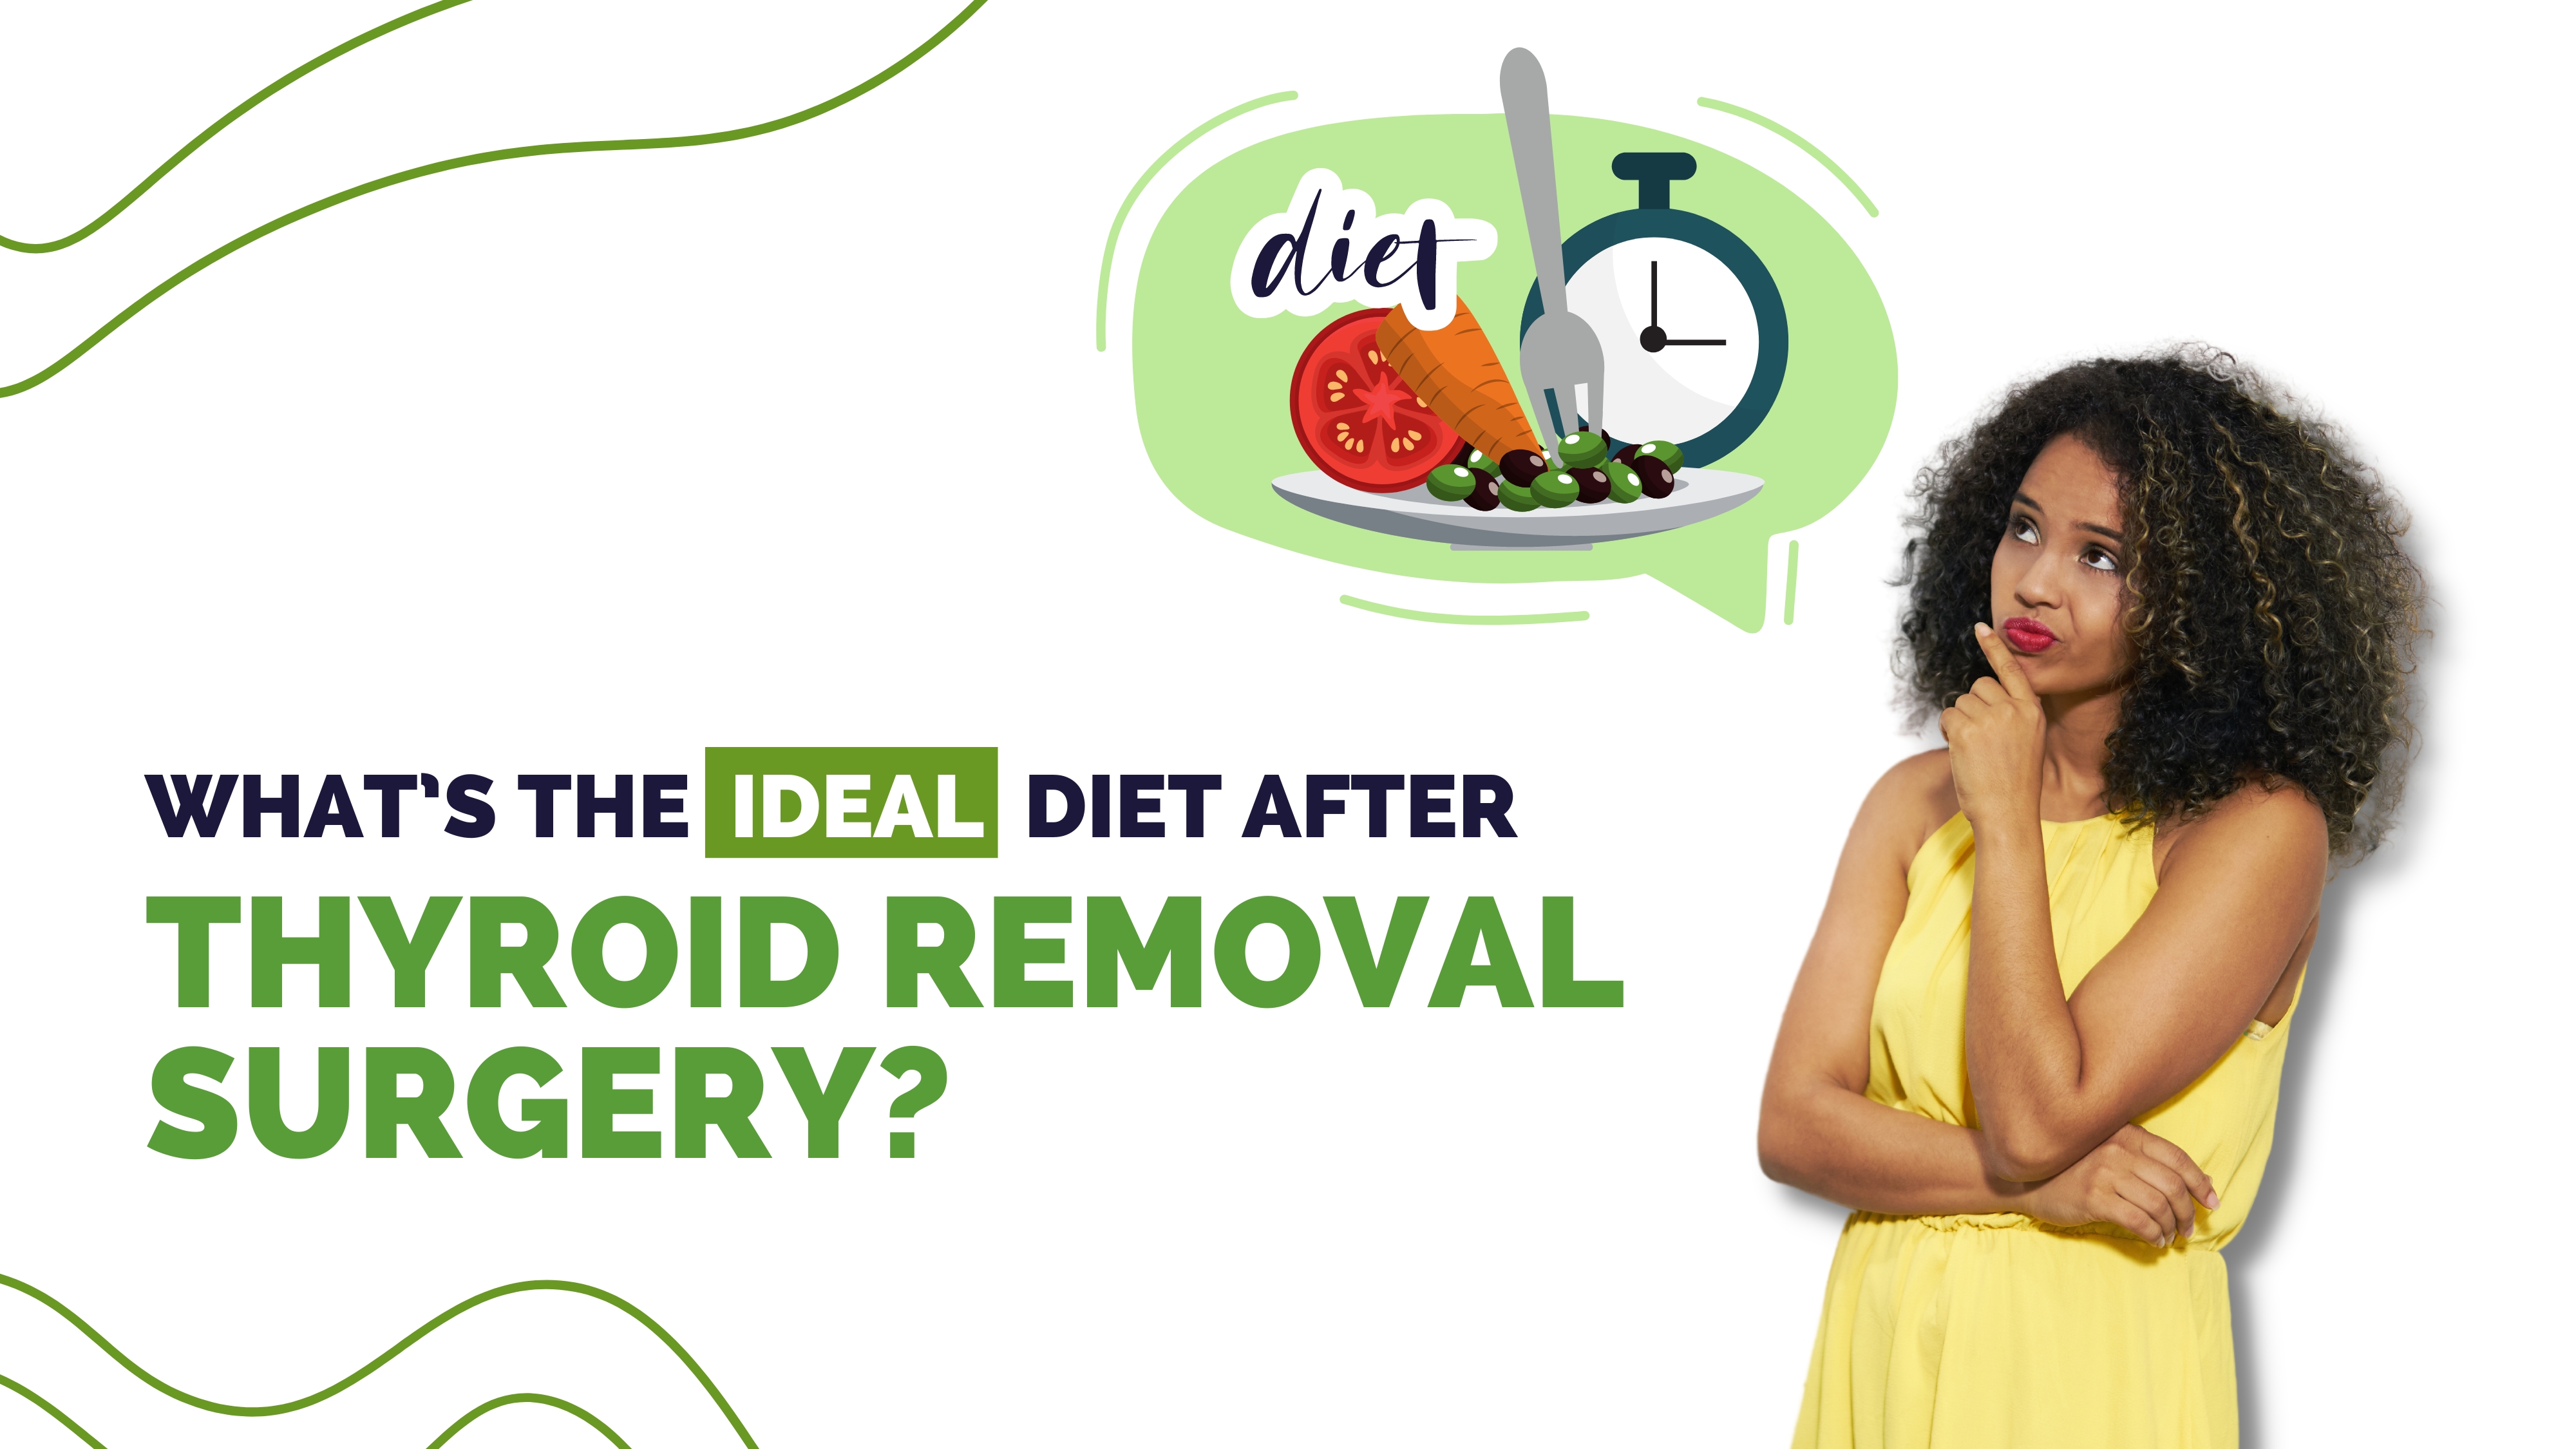 Diet after thyroid removal